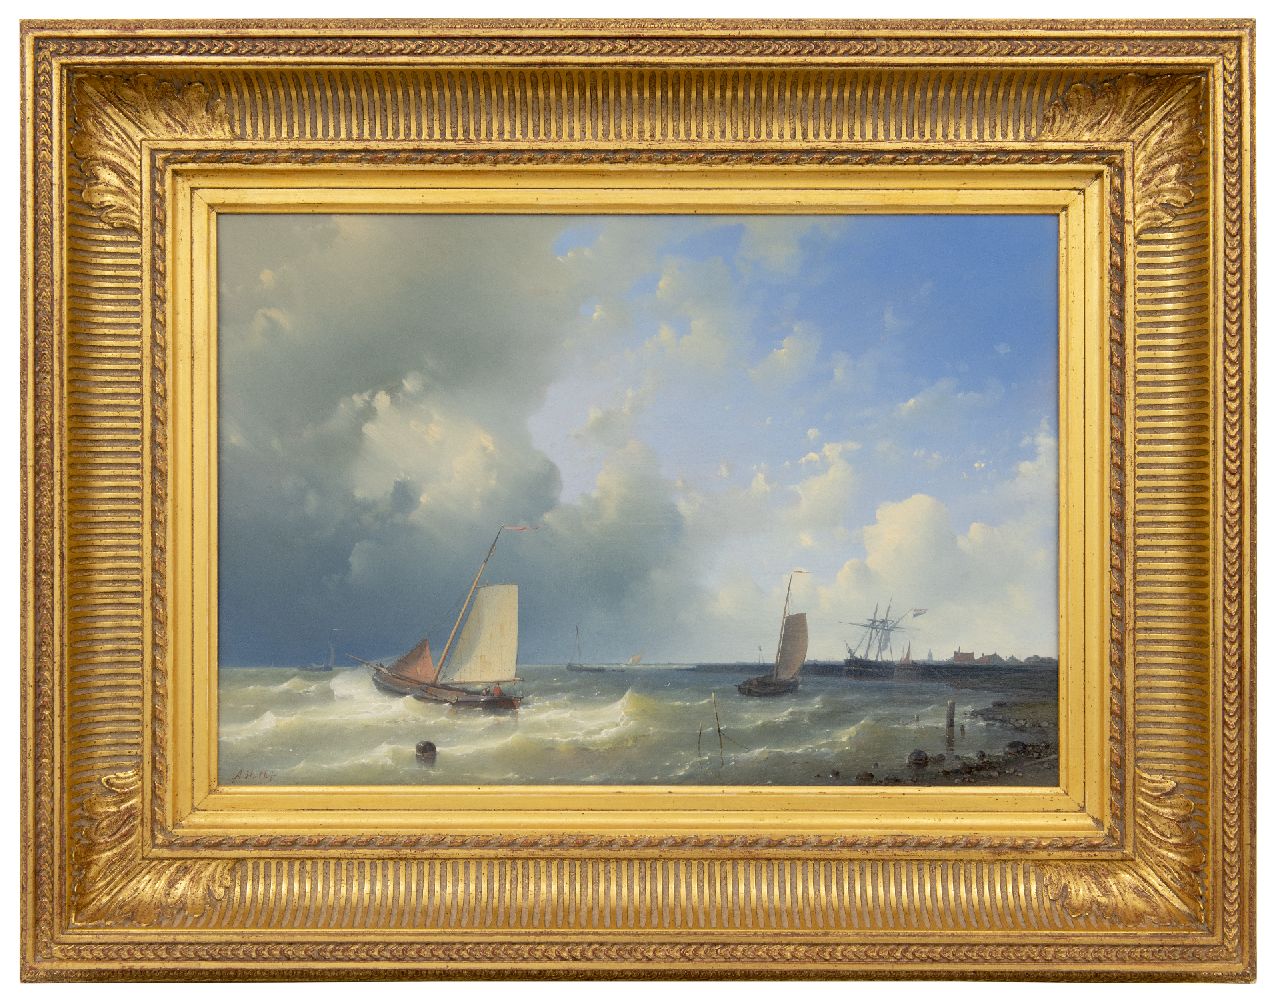 Hulk A.  | Abraham Hulk | Paintings offered for sale | Fishing boats in a strong breeze at the harbour entrance, oil on panel 36.5 x 53.5 cm, signed l.l.